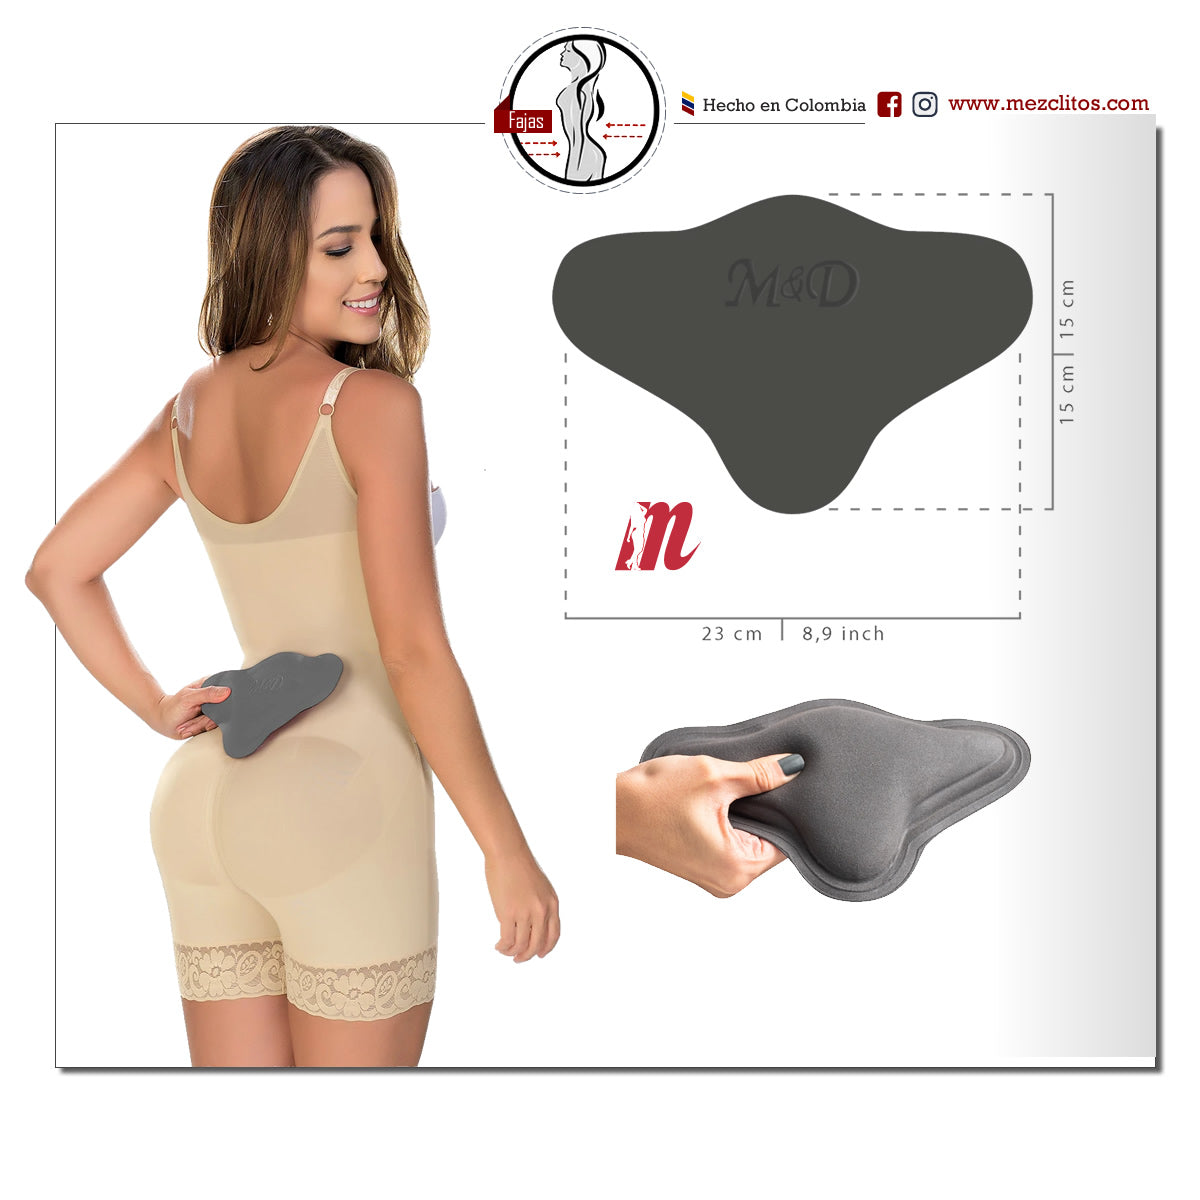 Buy Fajas Colombianas M&D Full Body Shaper Style Post Surgical